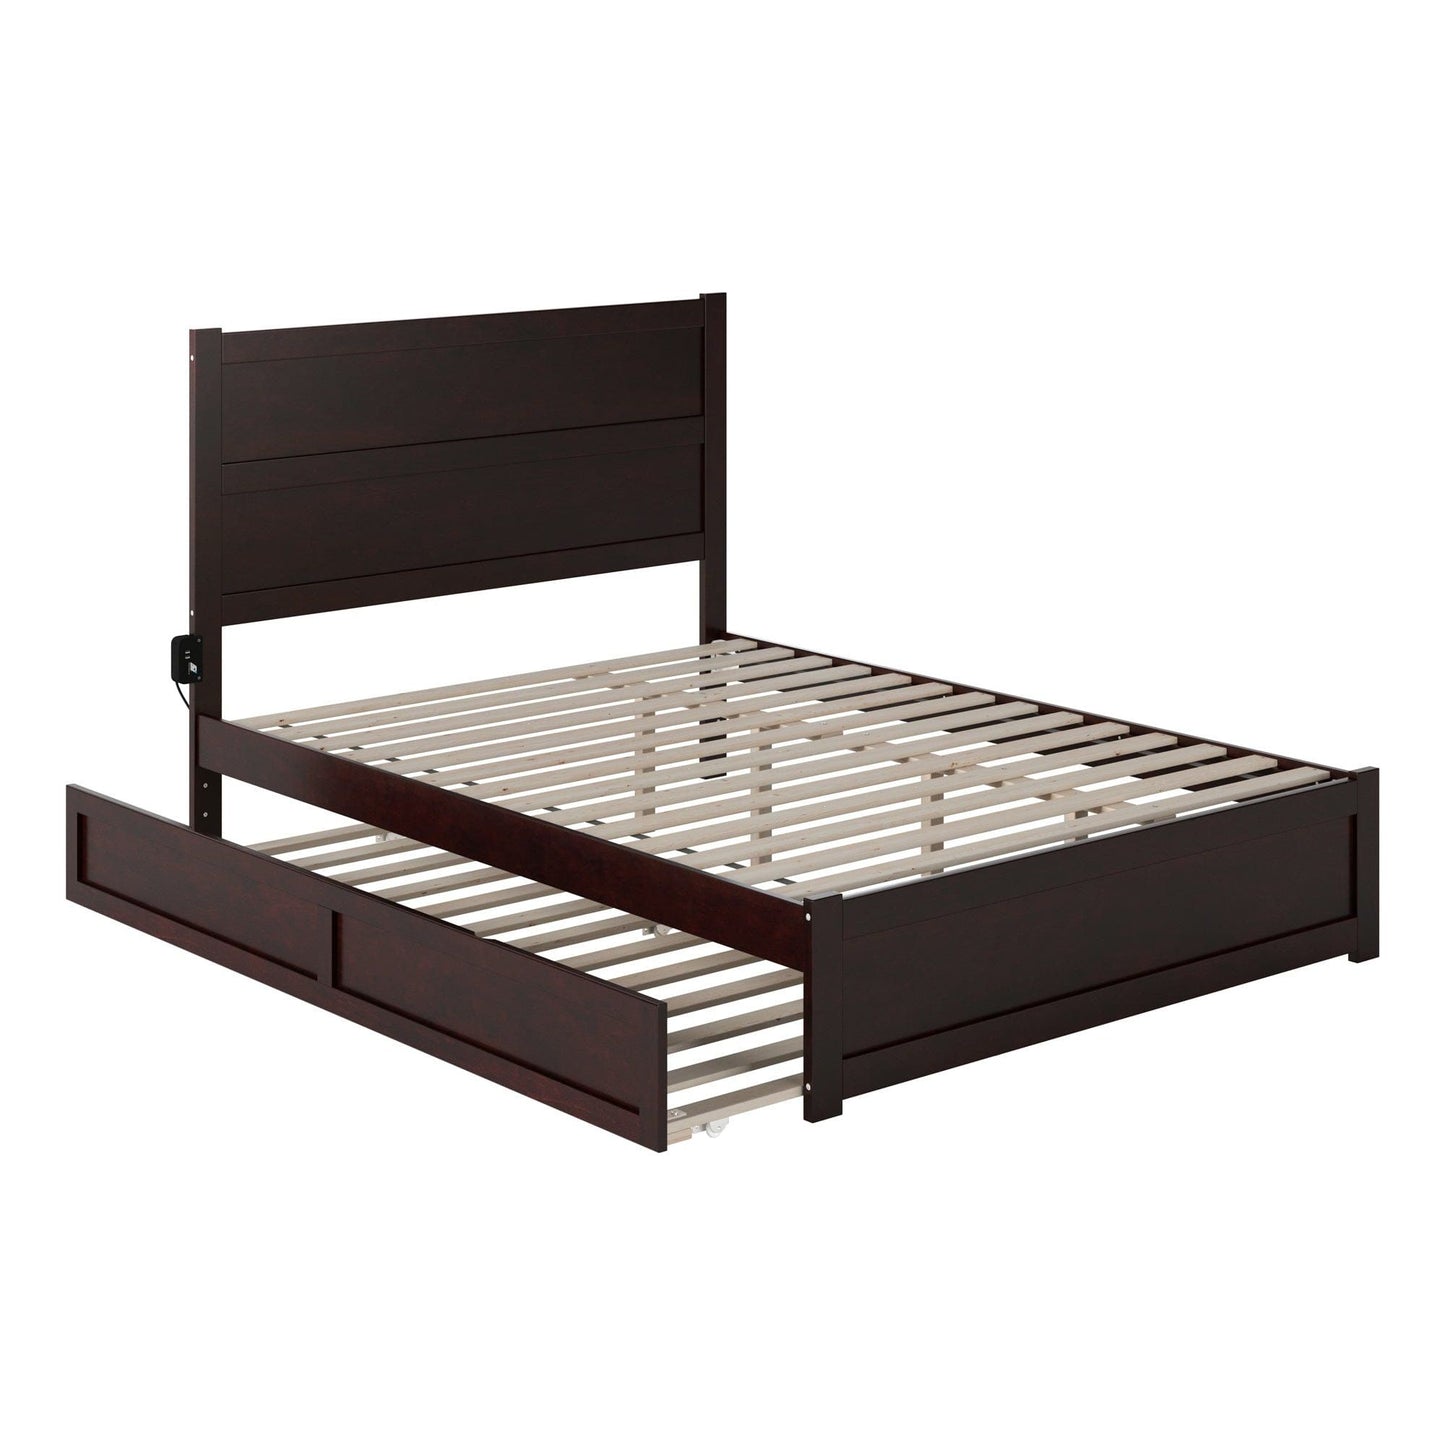 AFI Furnishings NoHo Queen Bed with Footboard and Twin Extra Long Trundle in Espresso